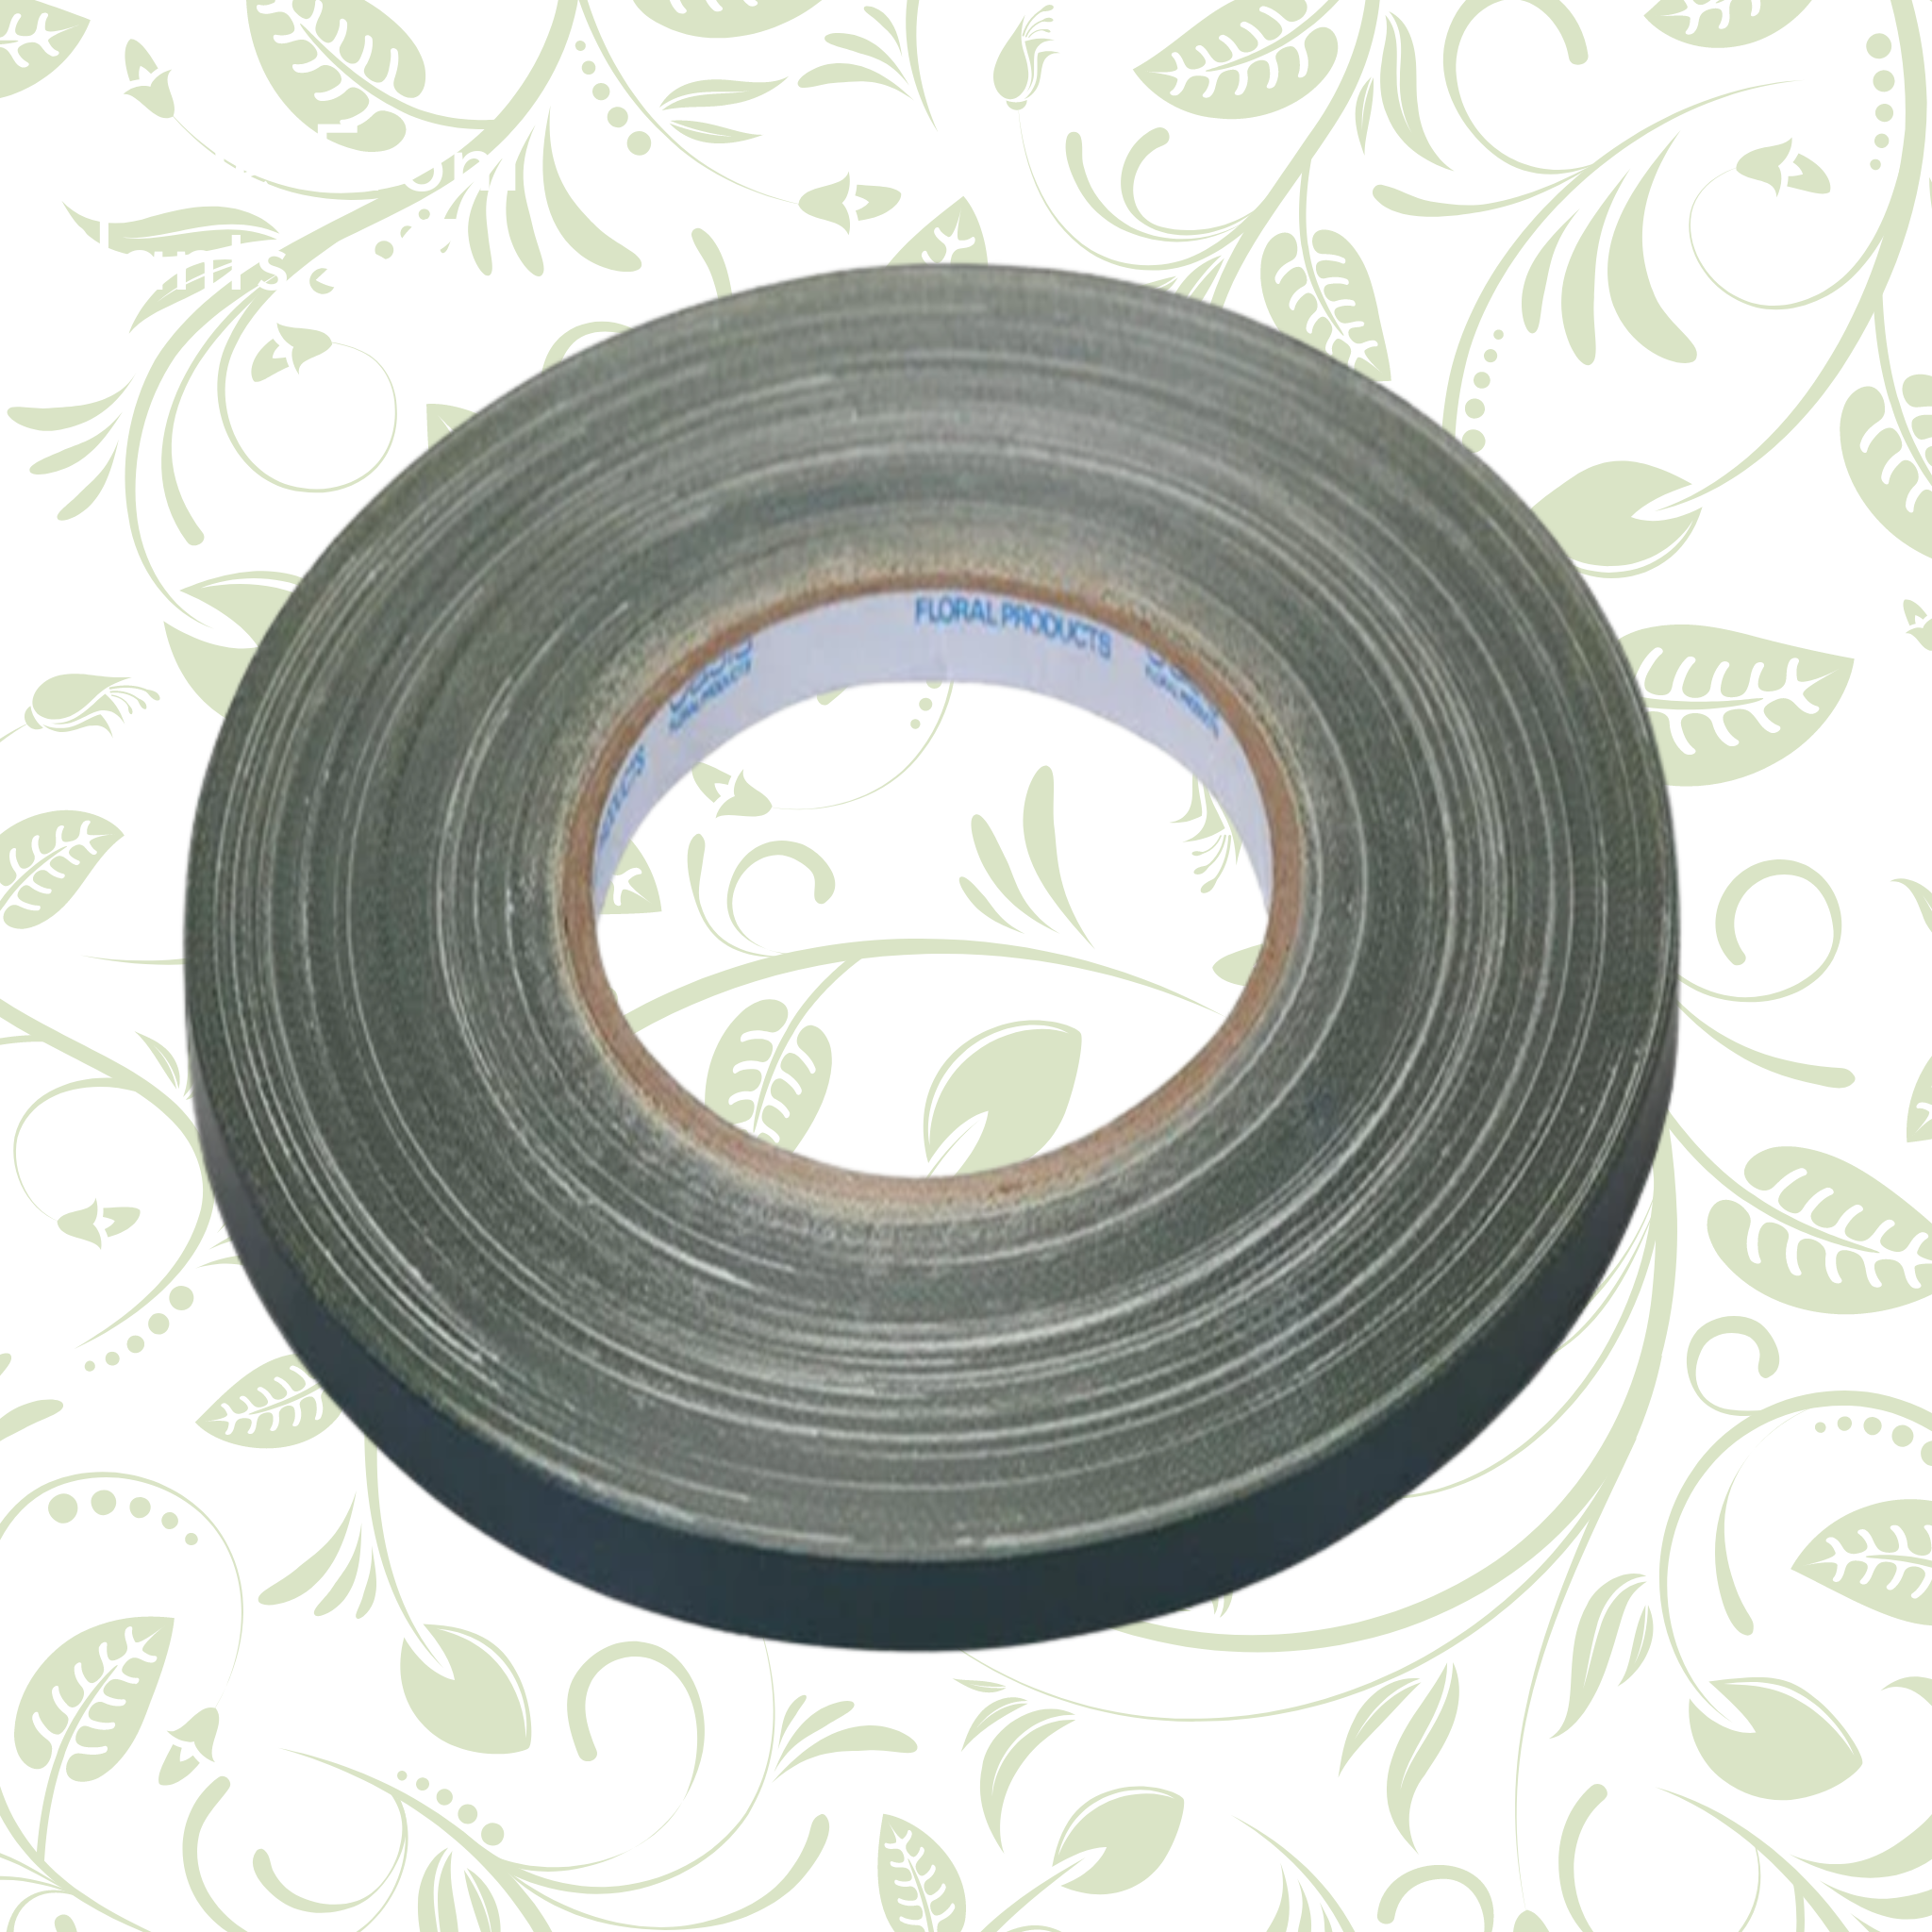 Anchoring Tape